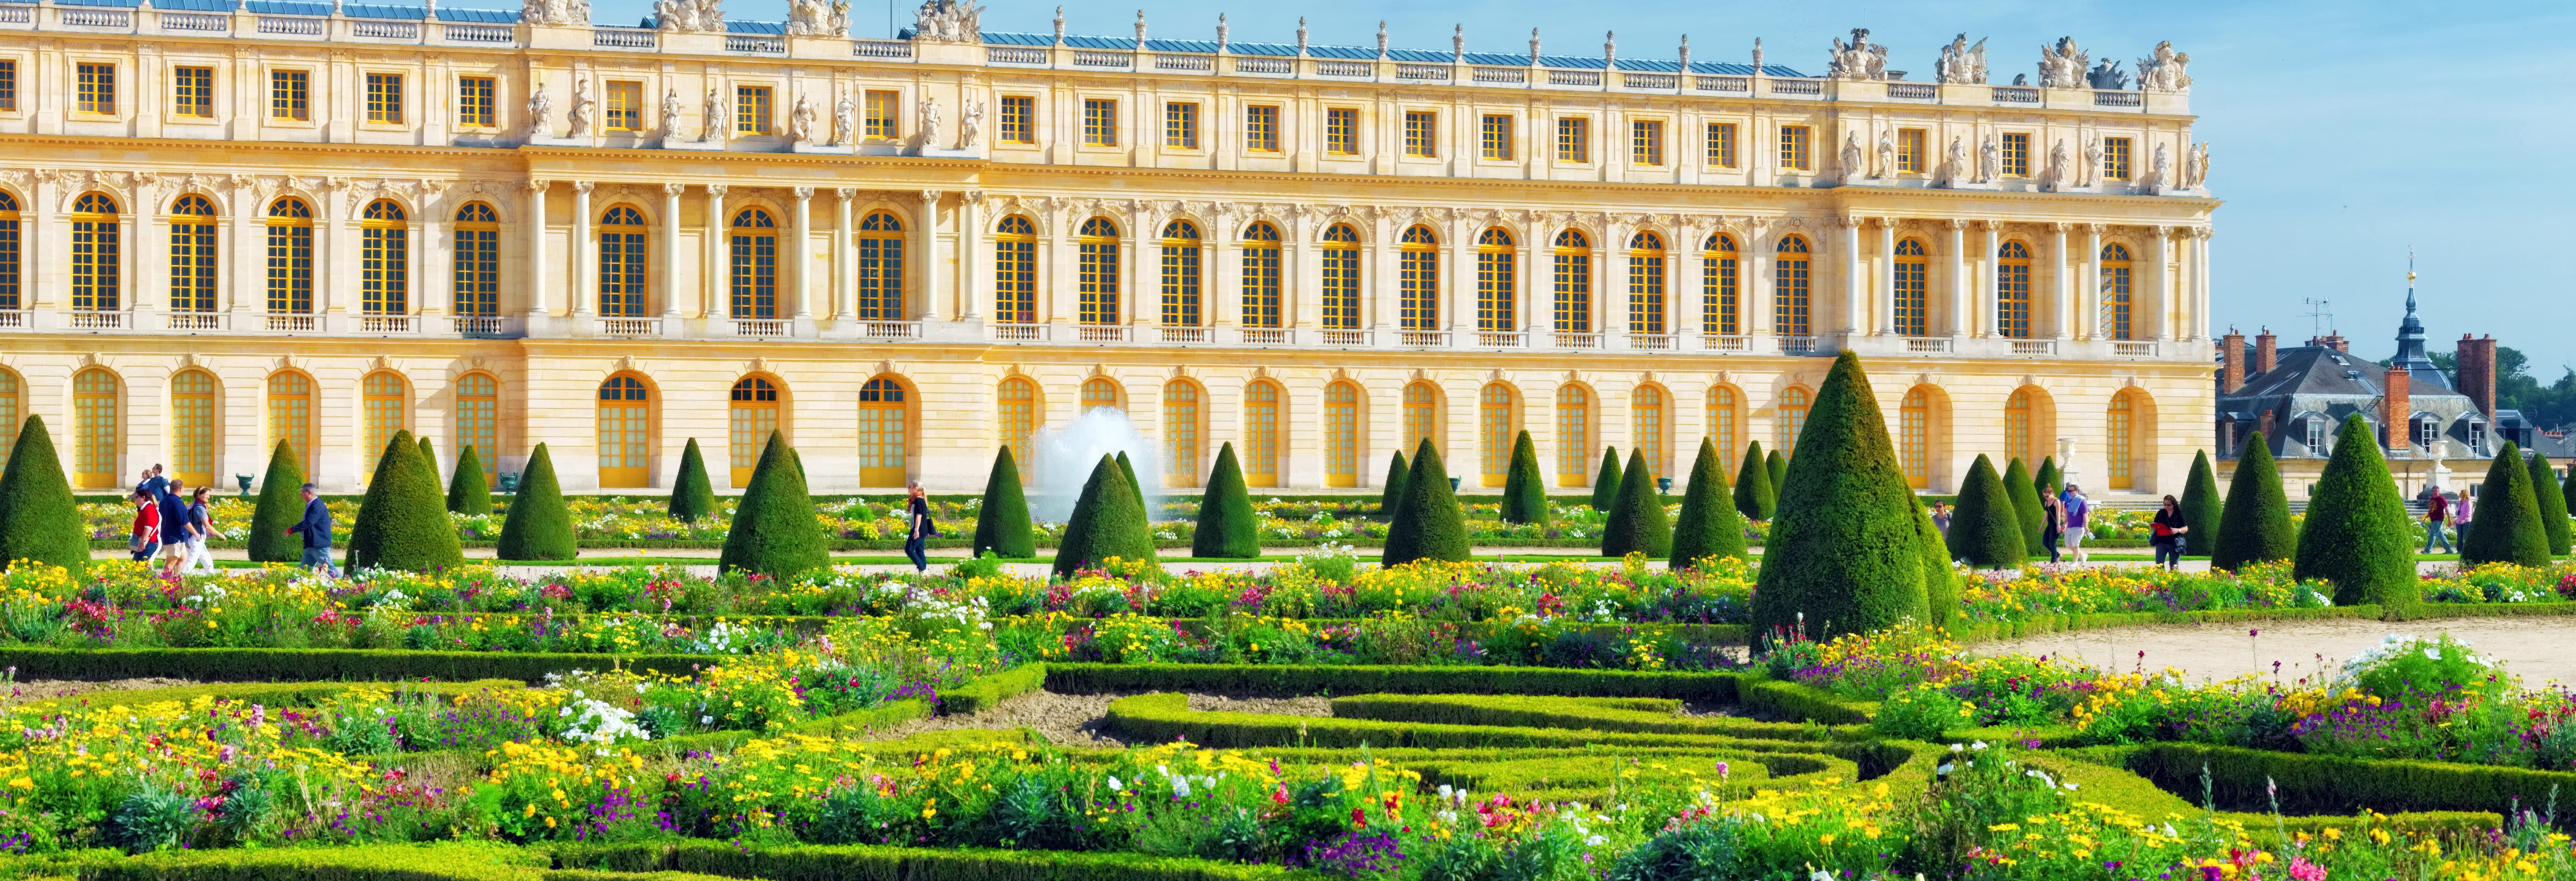 One day guided tour of the Palace of Versailles - reserved access - transport from Paris included